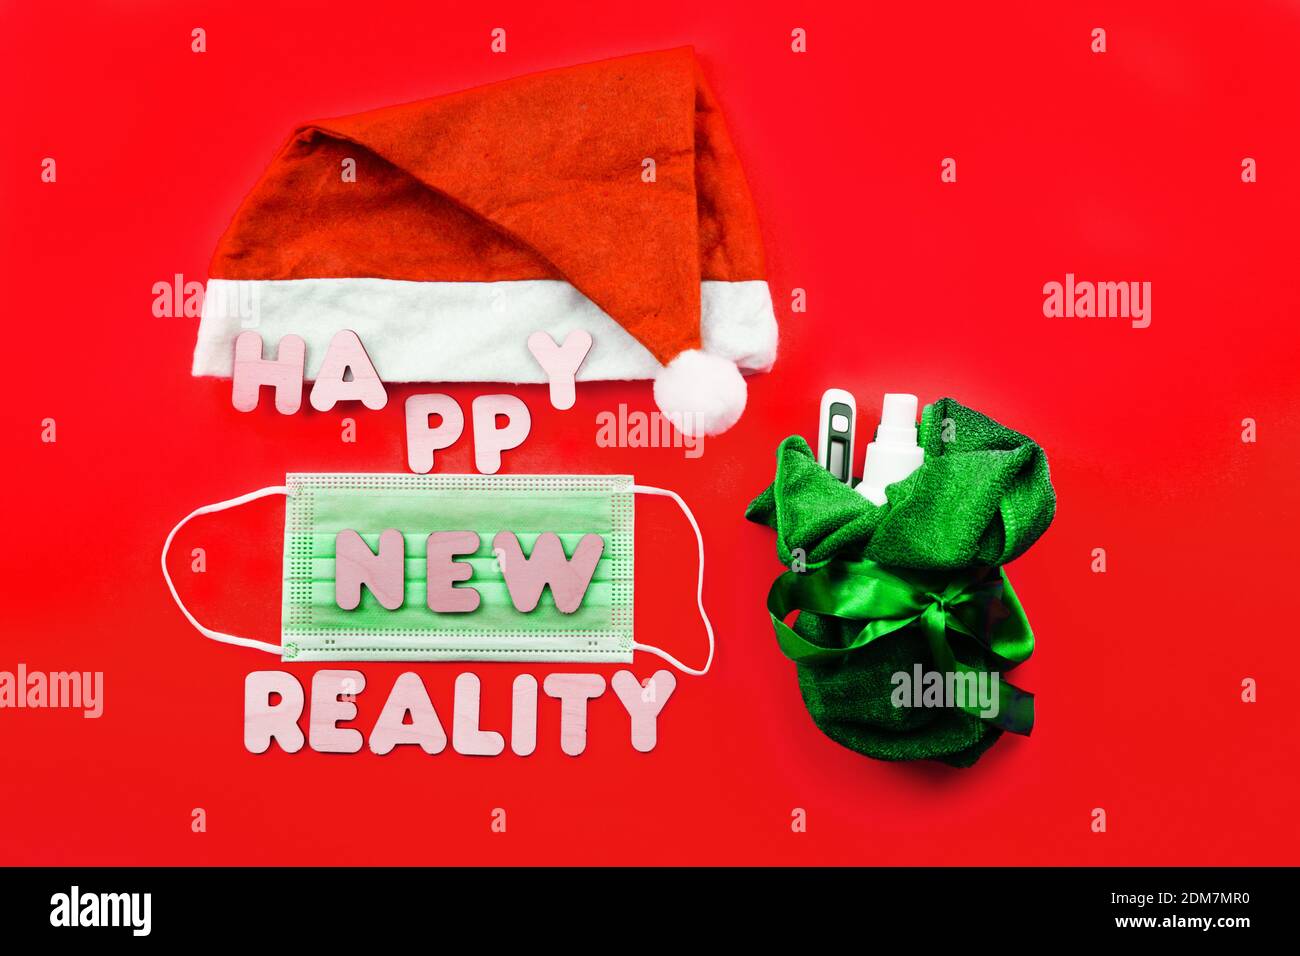 https://c8.alamy.com/comp/2DM7MR0/santa-hat-protective-face-mask-and-wooden-letters-happy-new-reality-on-red-background-christmas-and-new-year-during-epidemic-concept-2DM7MR0.jpg